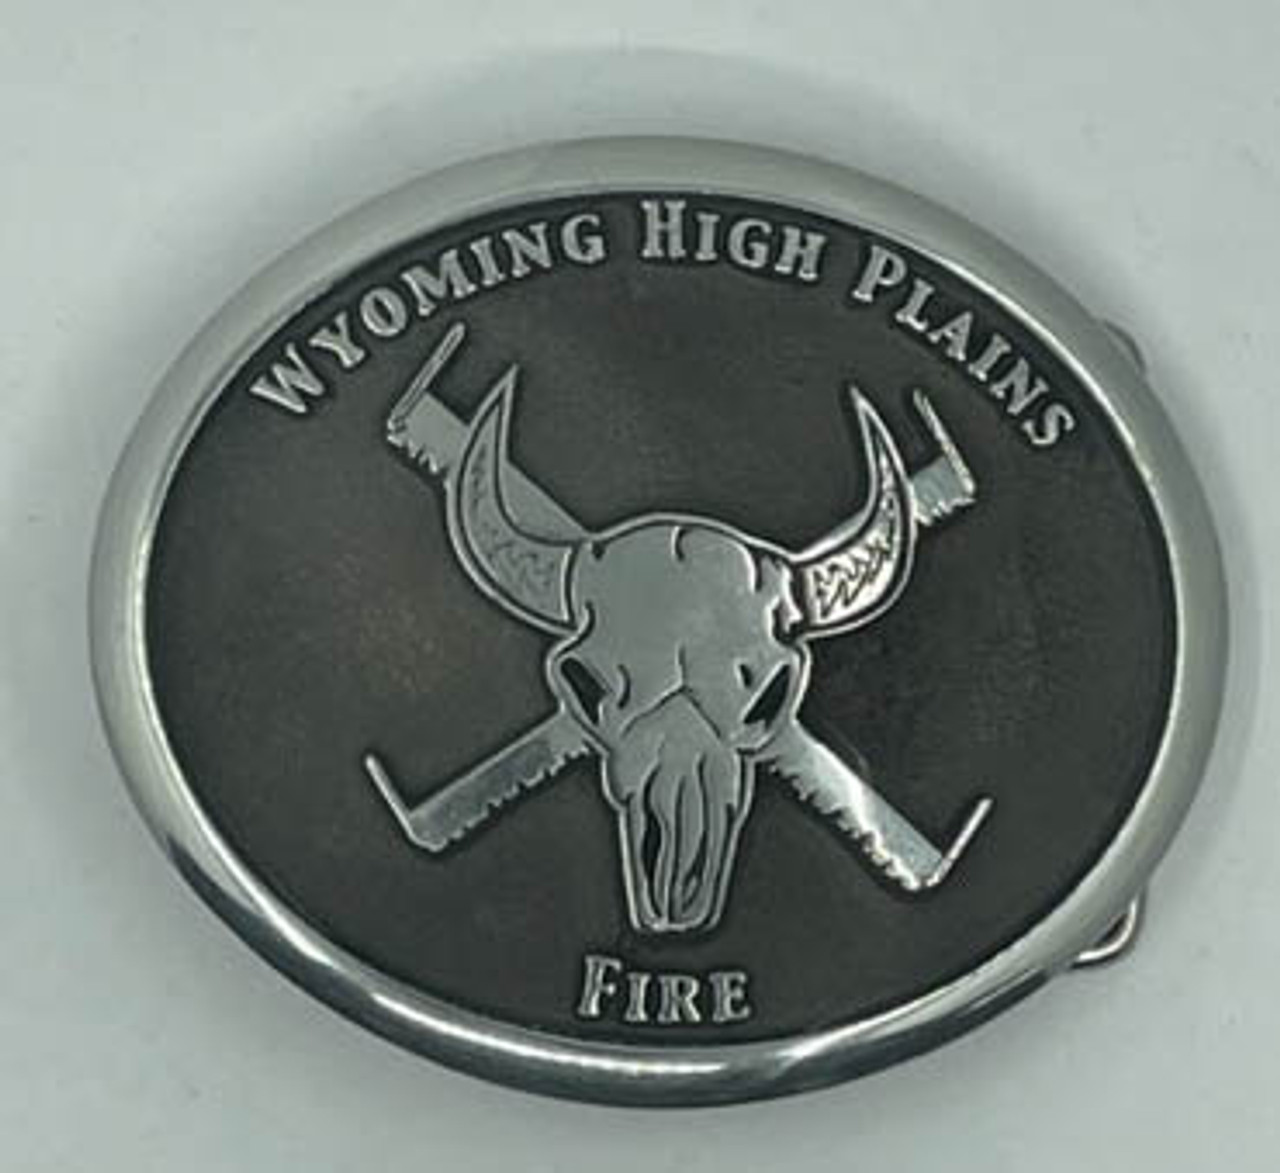 Wyoming High Plains Fire Buckle (RESTRICTED)